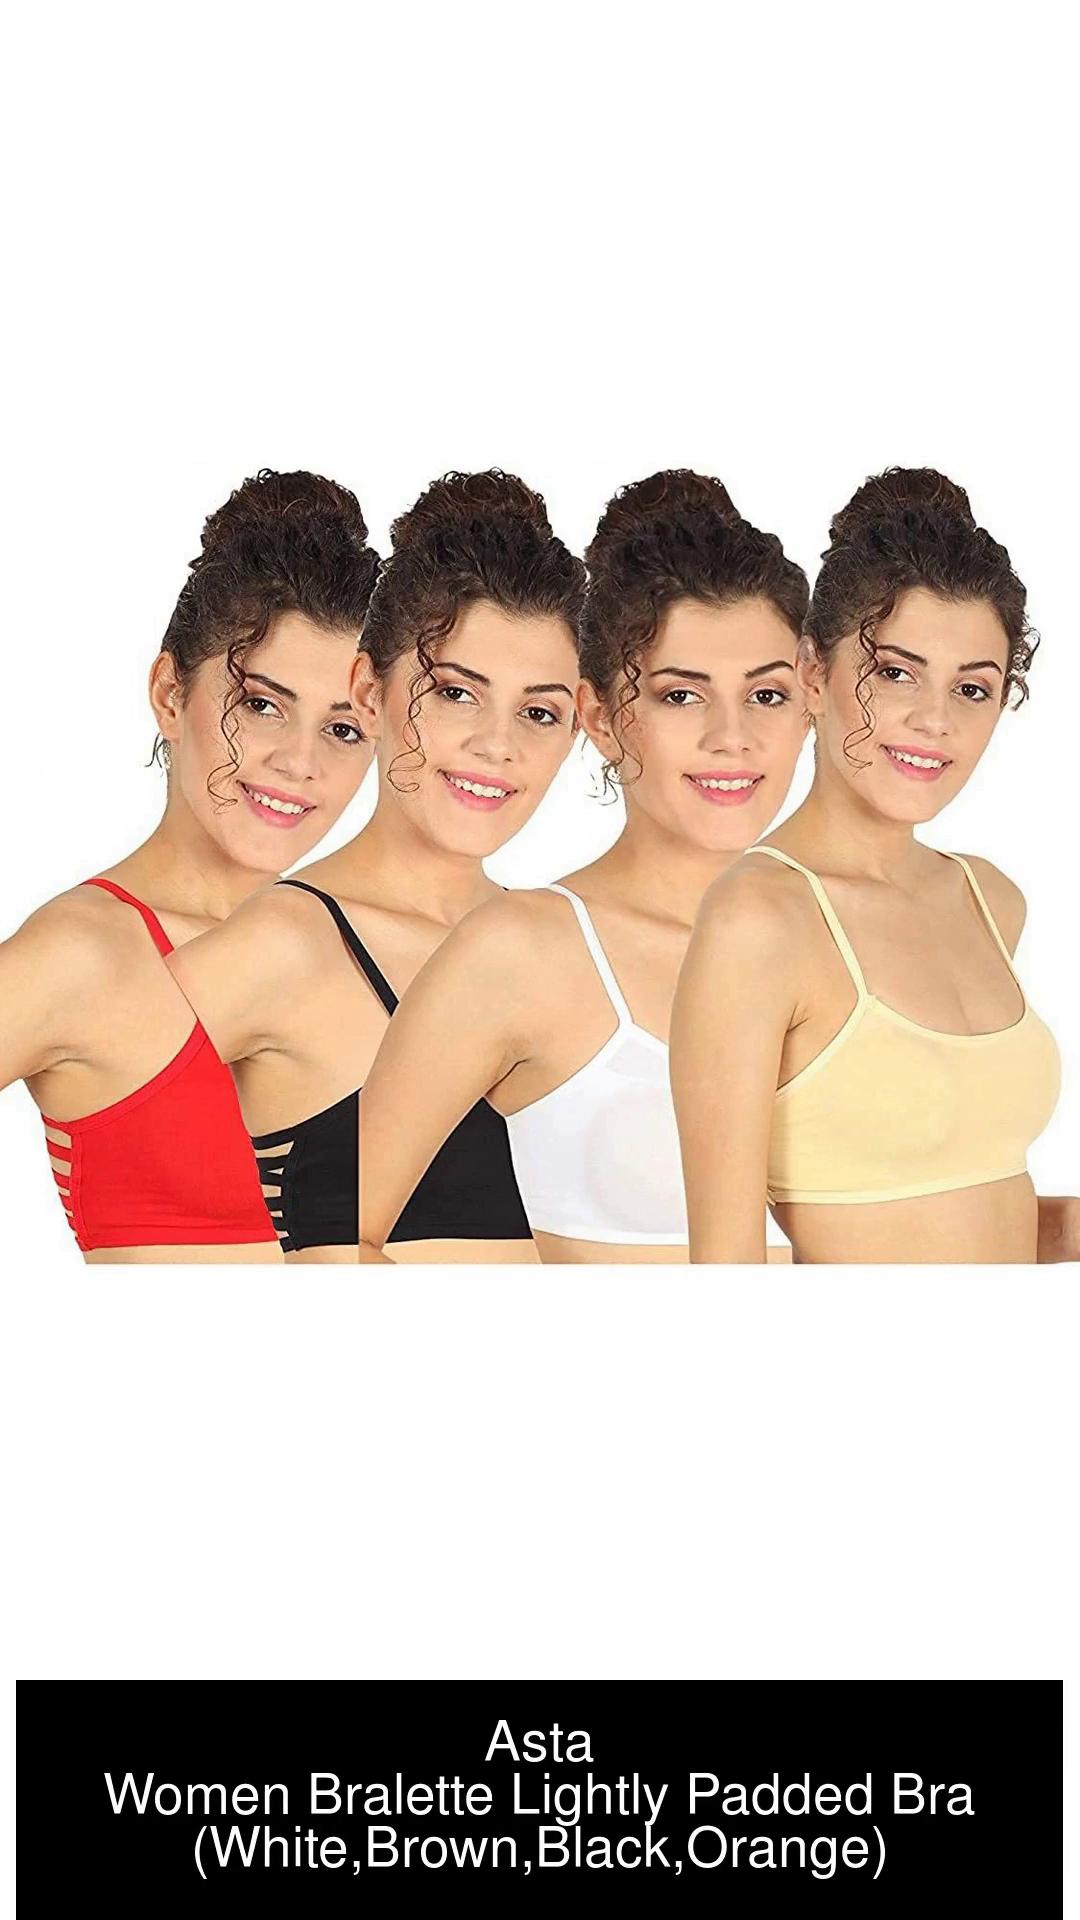 Asta 6 Strap Cotton Padded Bra Combo Pack 2 with Removable Pads  (Multicolour) Size 28 to 36 Women Bralette Lightly Padded Bra